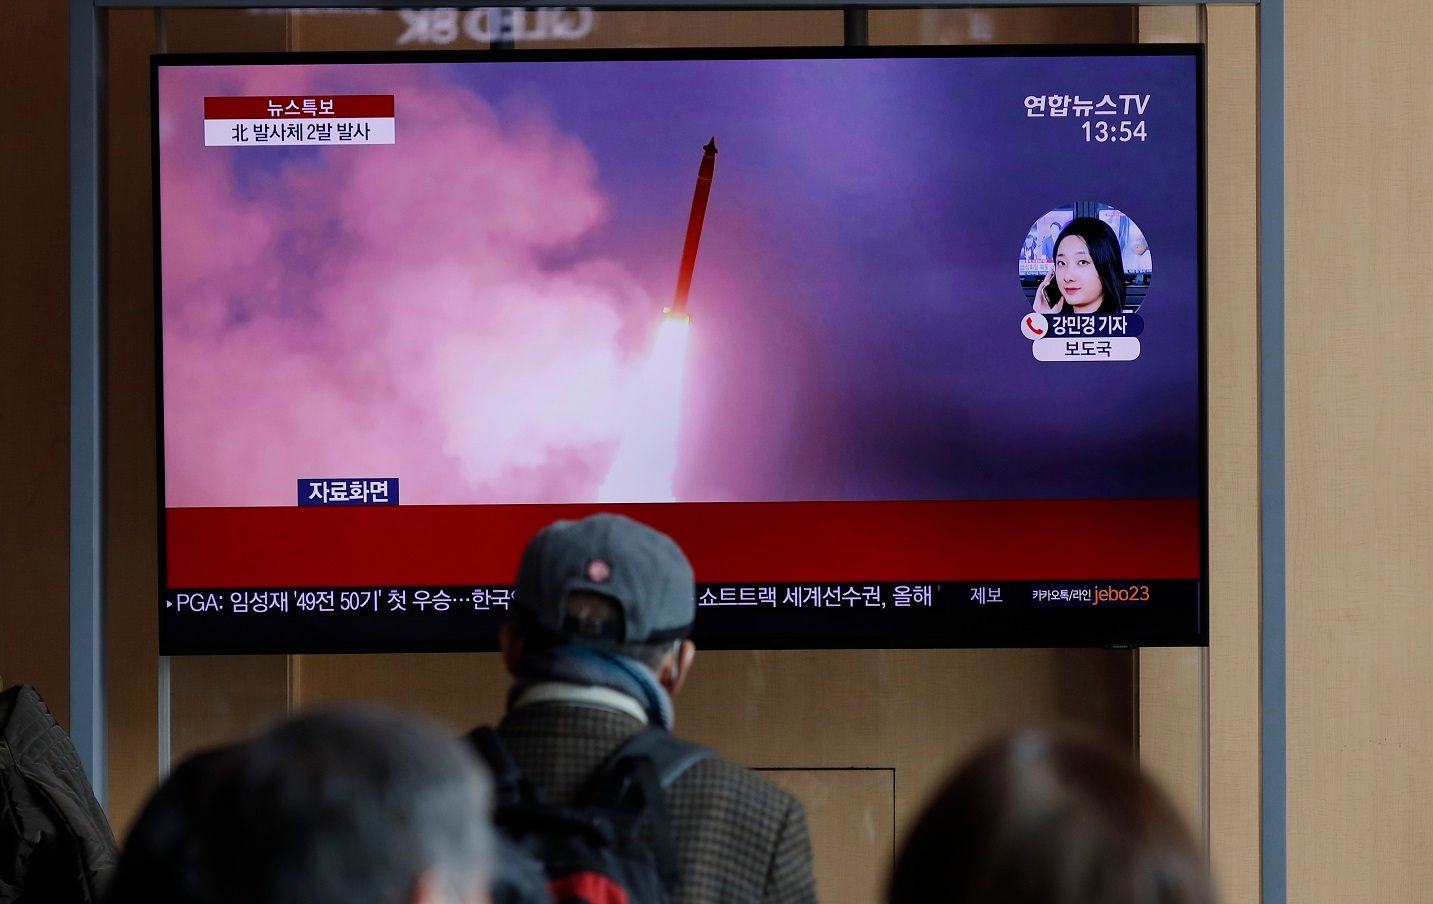 North Korea Fires Unidentified Projectile I24news